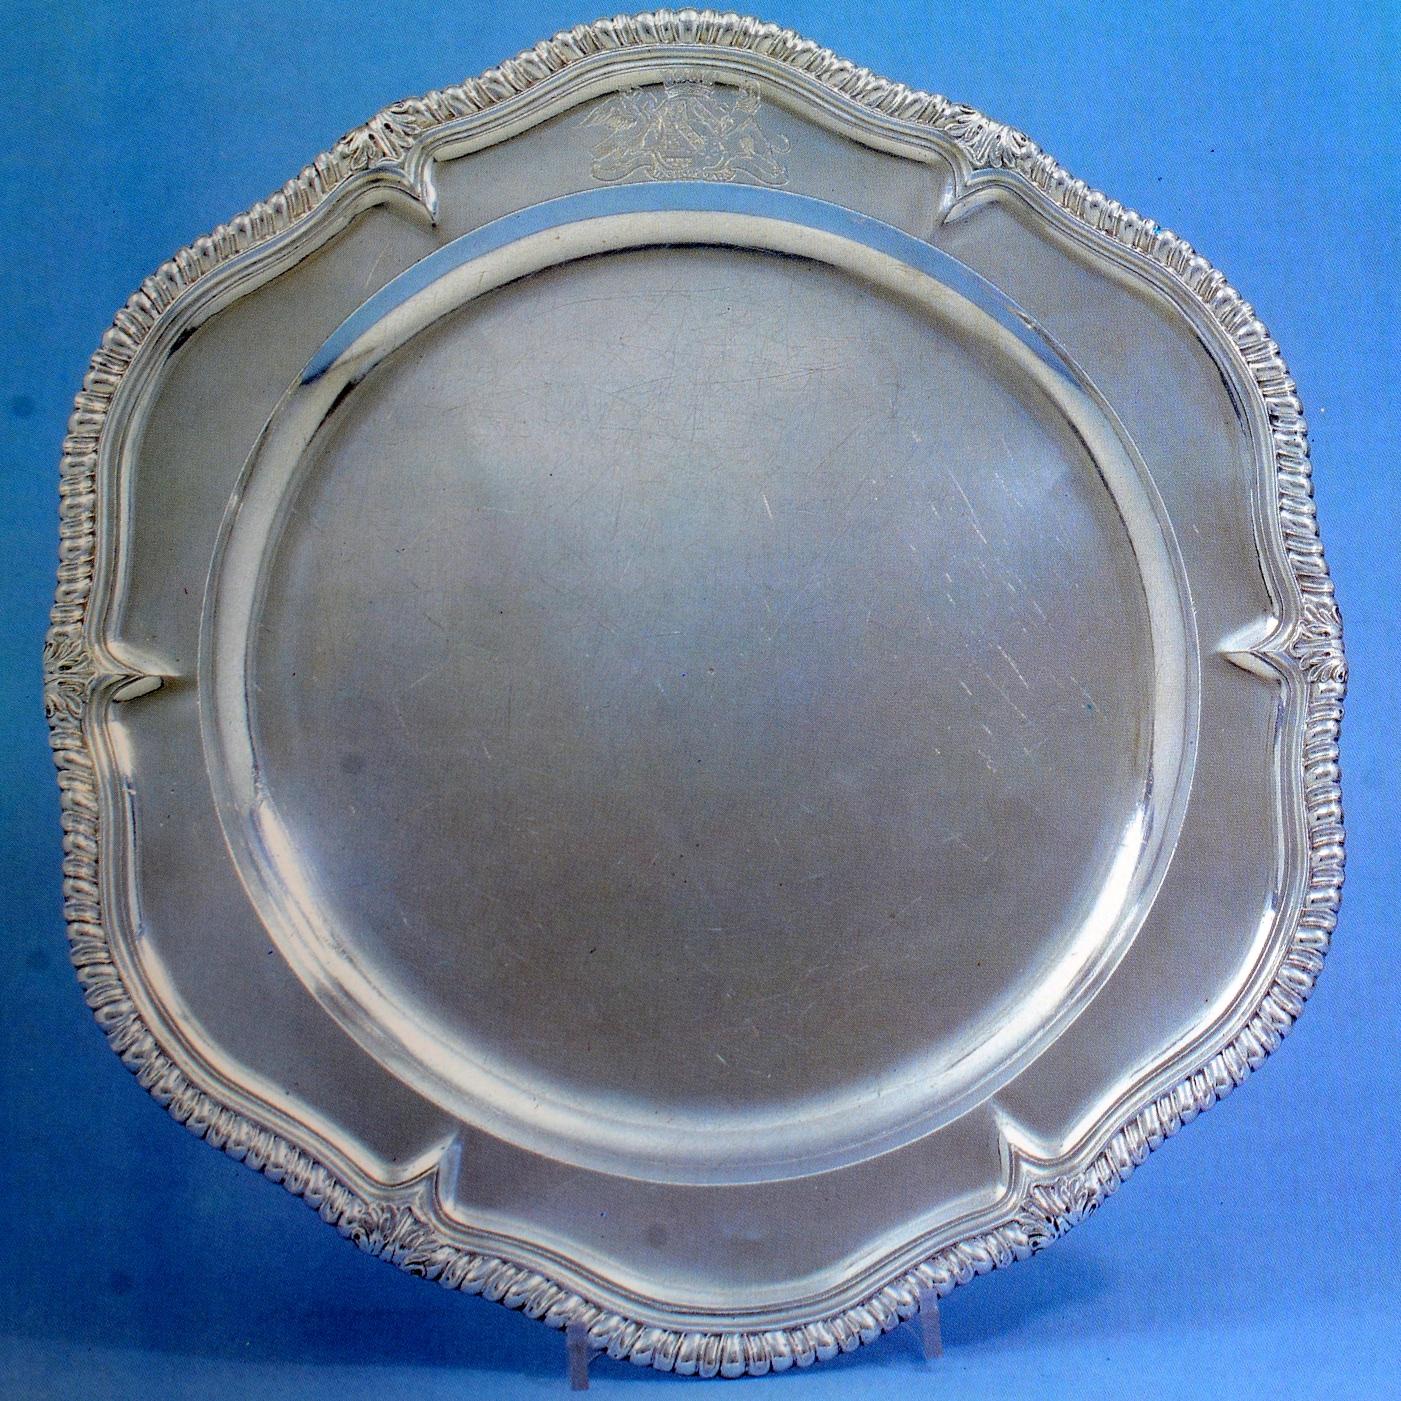 Sotheby's The Thanet Dinner Service Paul de Lamerie, 1742-1746 London 1st Ed In Excellent Condition For Sale In valatie, NY